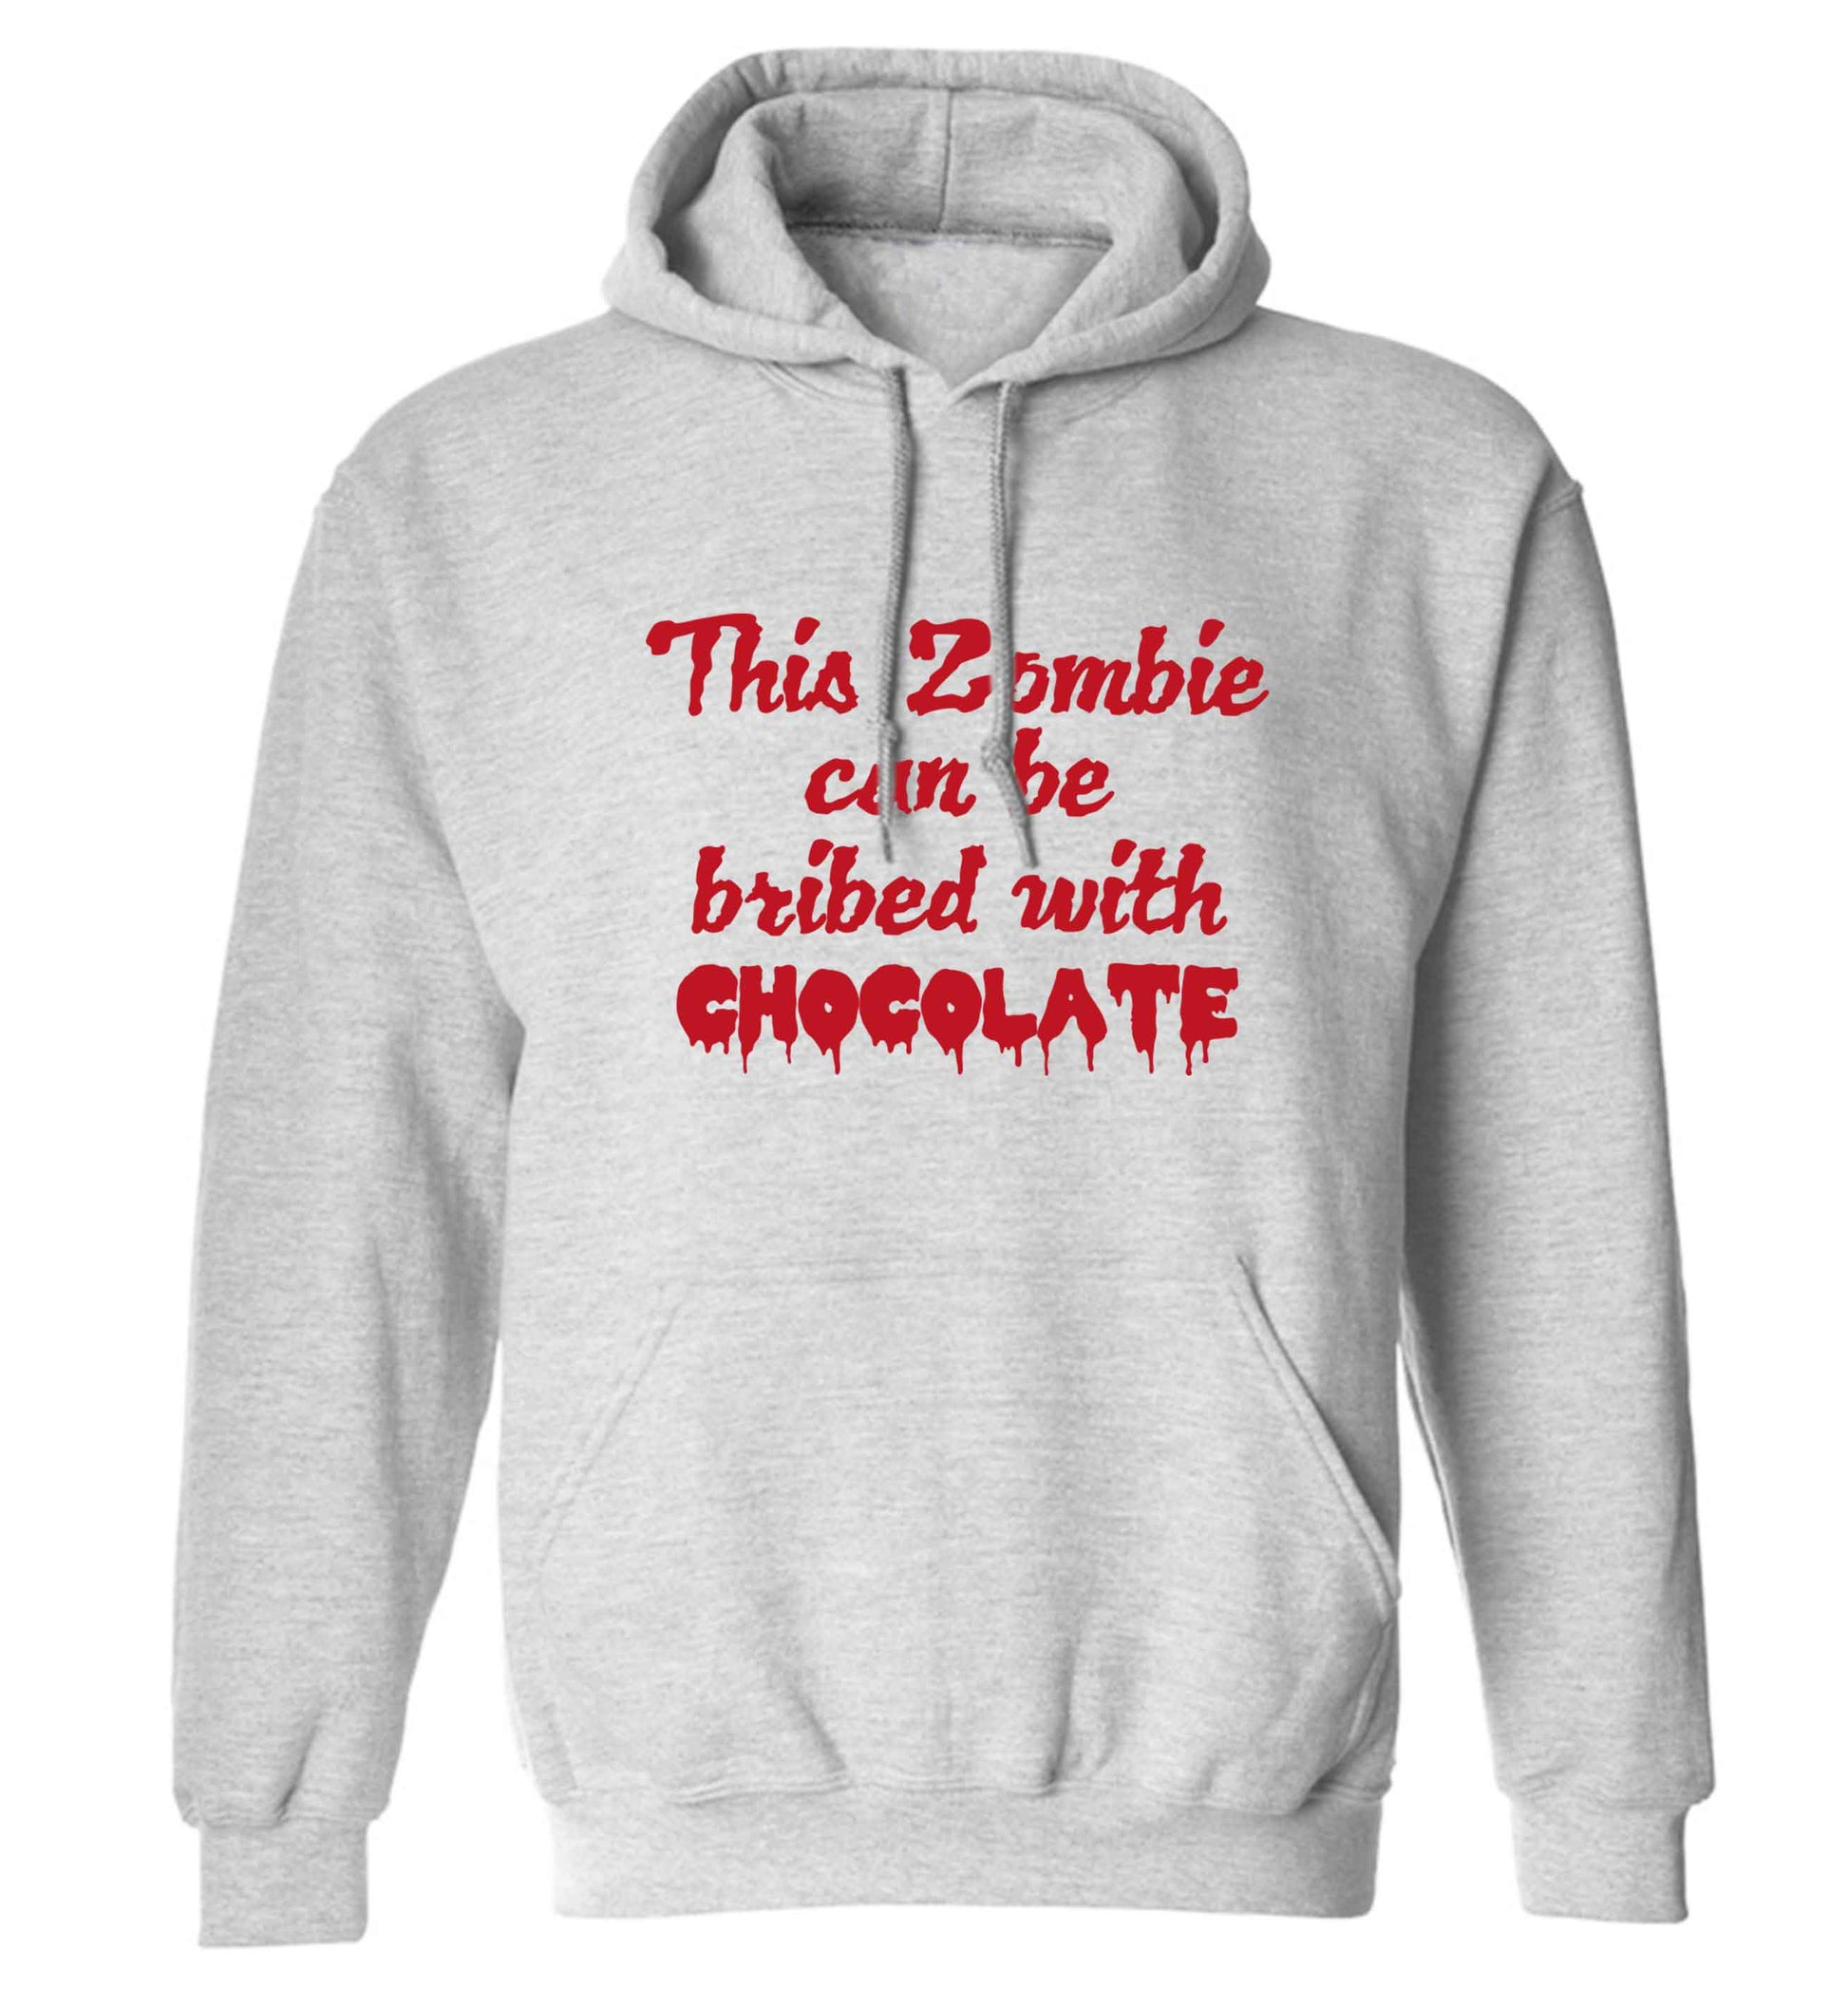 This zombie can be bribed with chocolate adults unisex grey hoodie 2XL